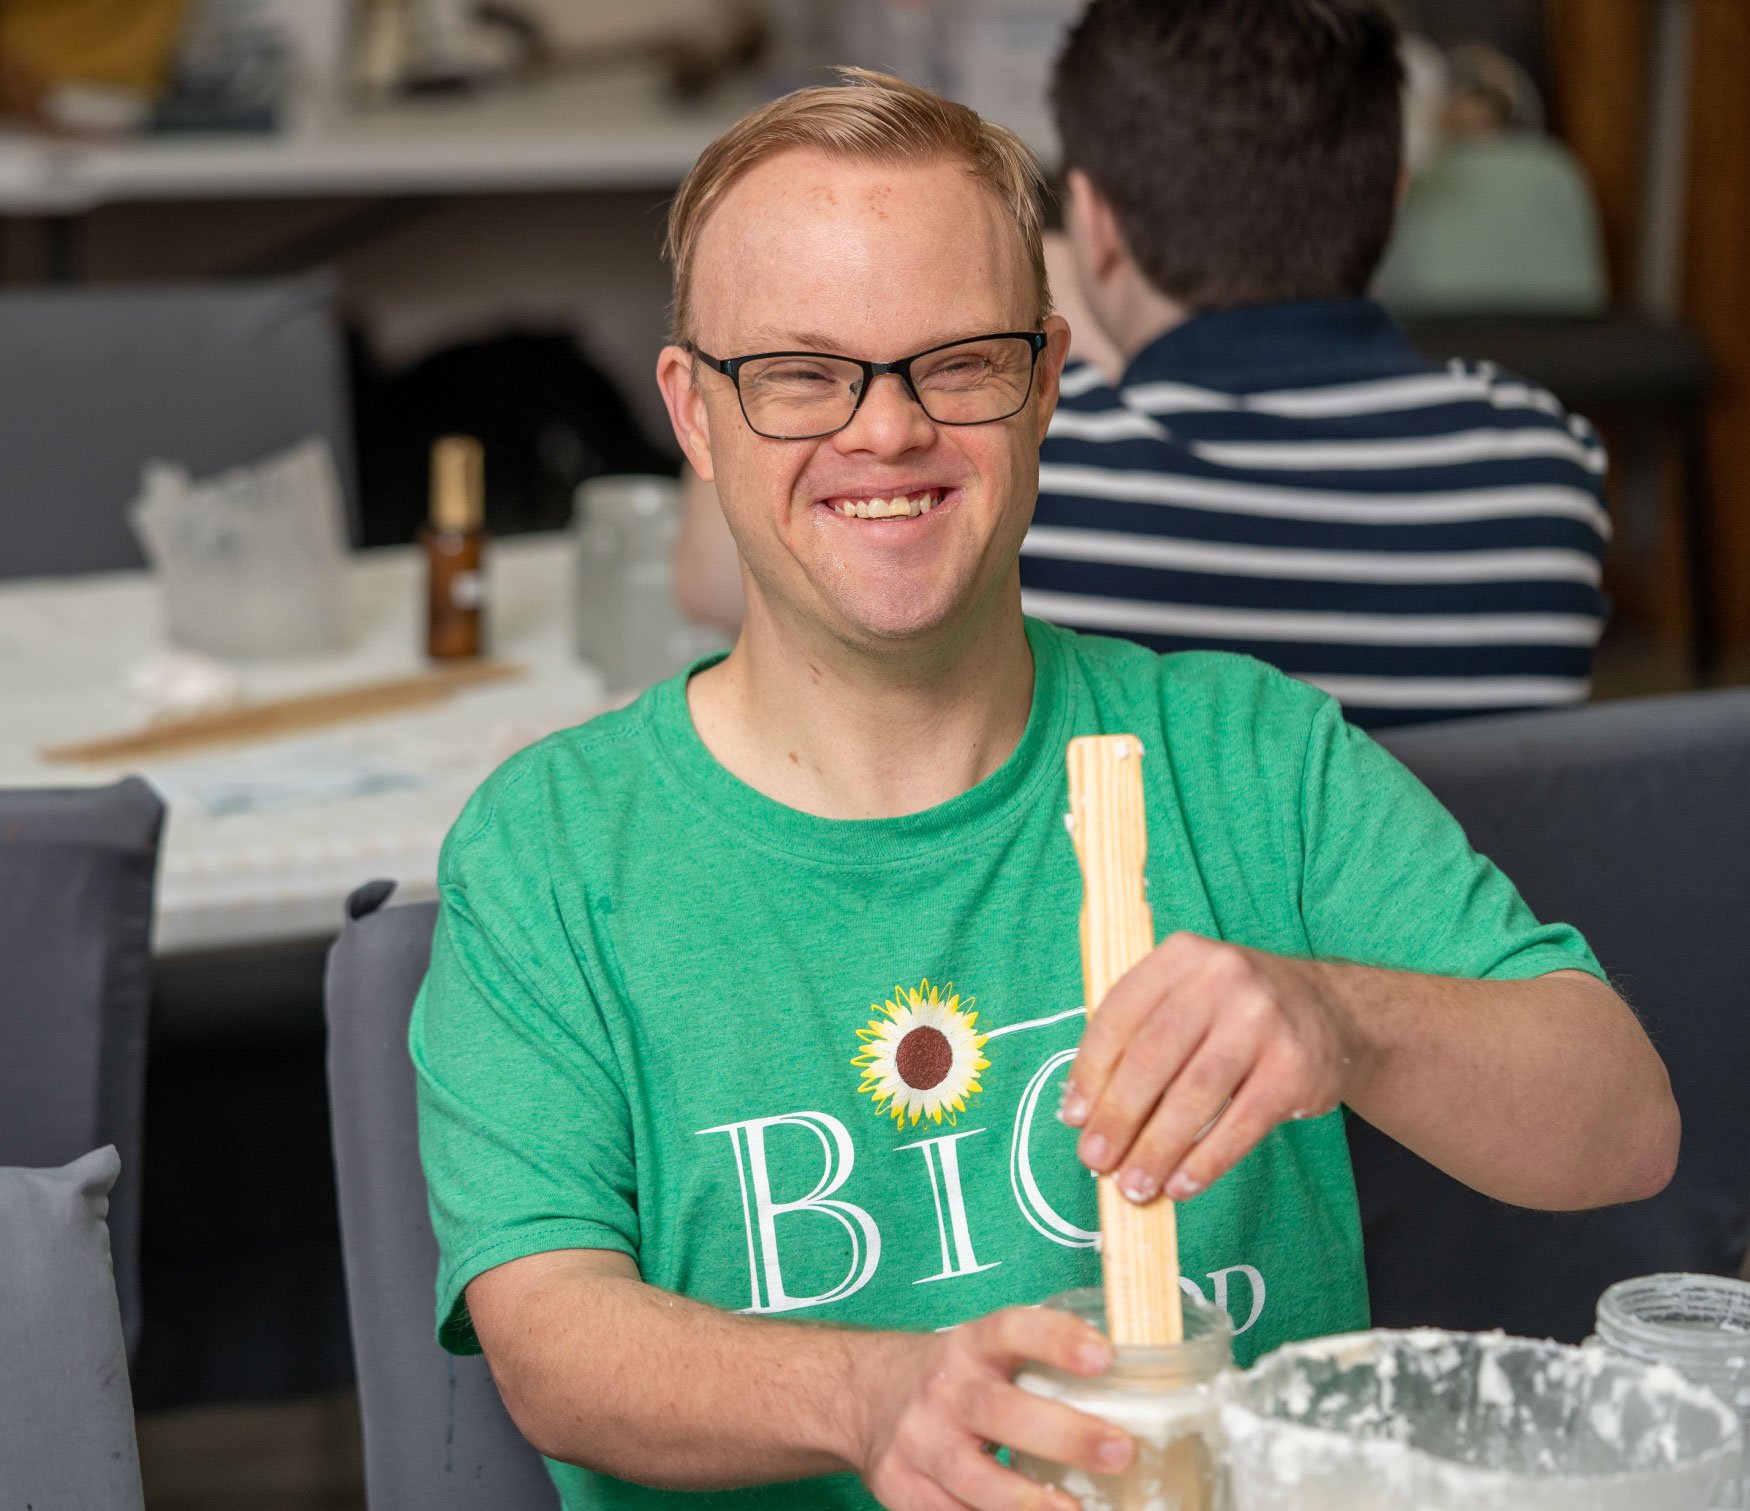 Man-with-glasses-and-green-shirt-making-custom-candles.jpg